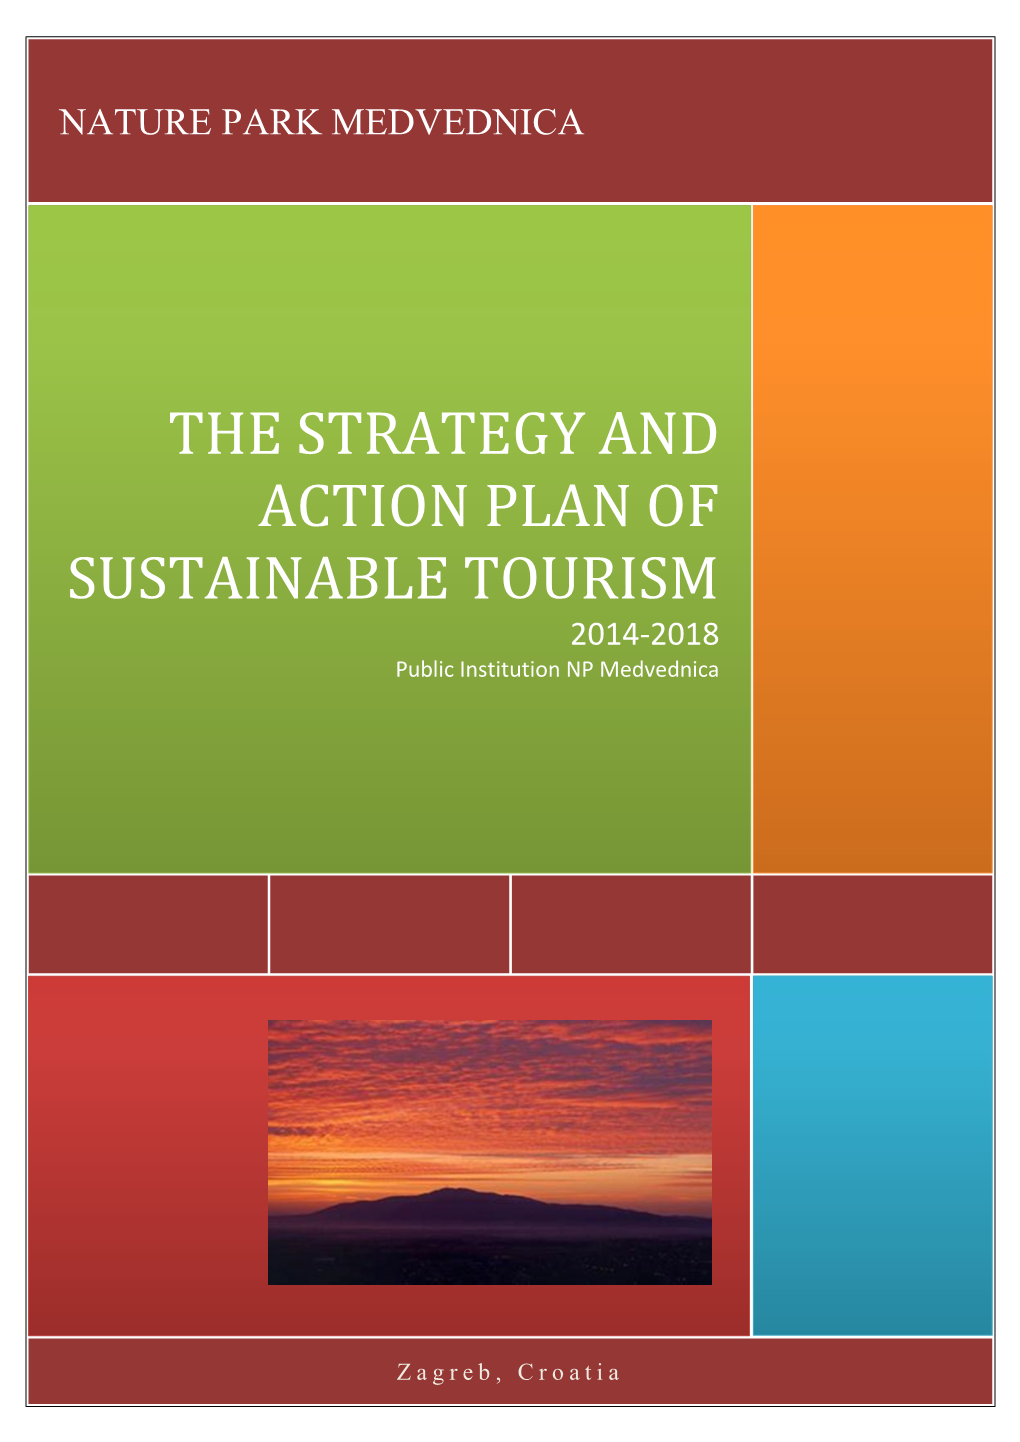 THE STRATEGY and ACTION PLAN of SUSTAINABLE TOURISM 2014-2018 Public Institution NP Medvednica